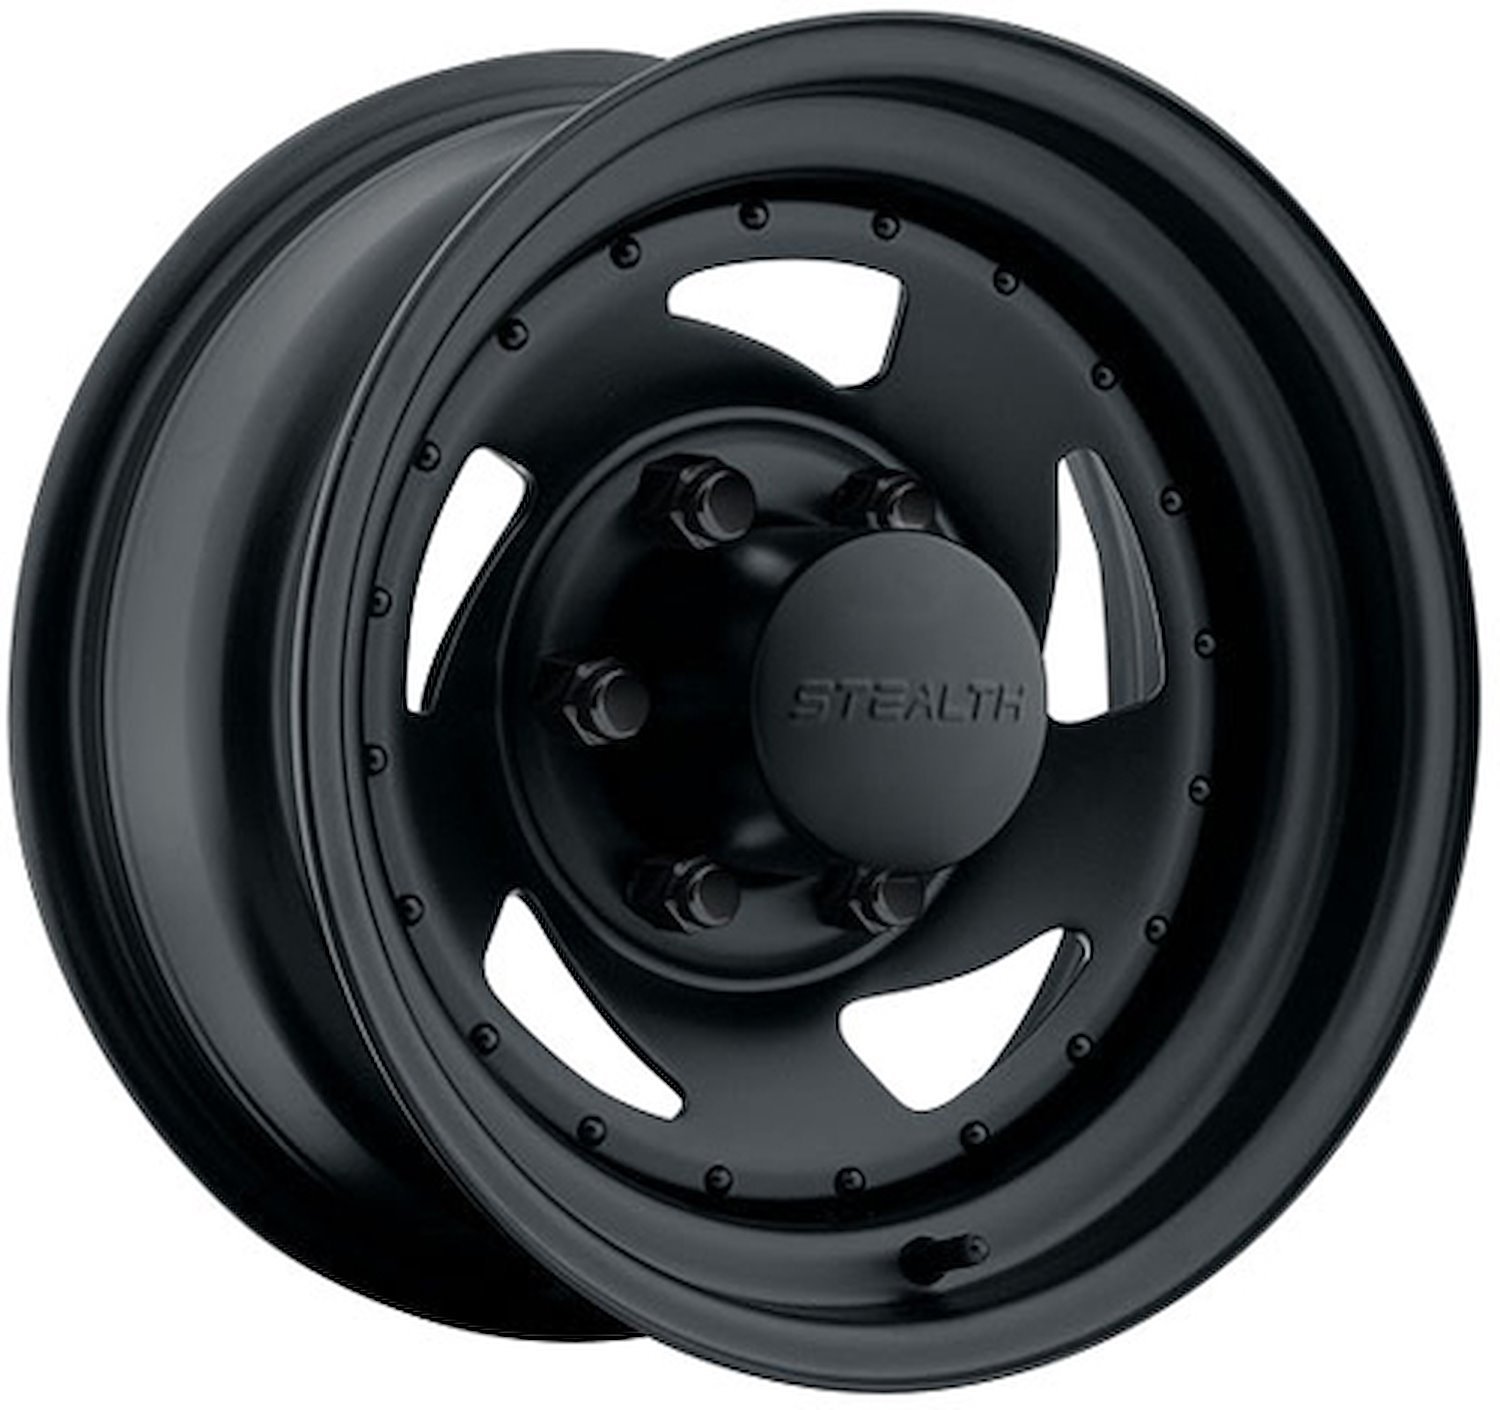 STEALTH BLACK BLADE 15 x 10 5 x 5 Bolt Circle 375 Back Spacing 44 offset 33 Center Bore 1500 lbs Load Rating